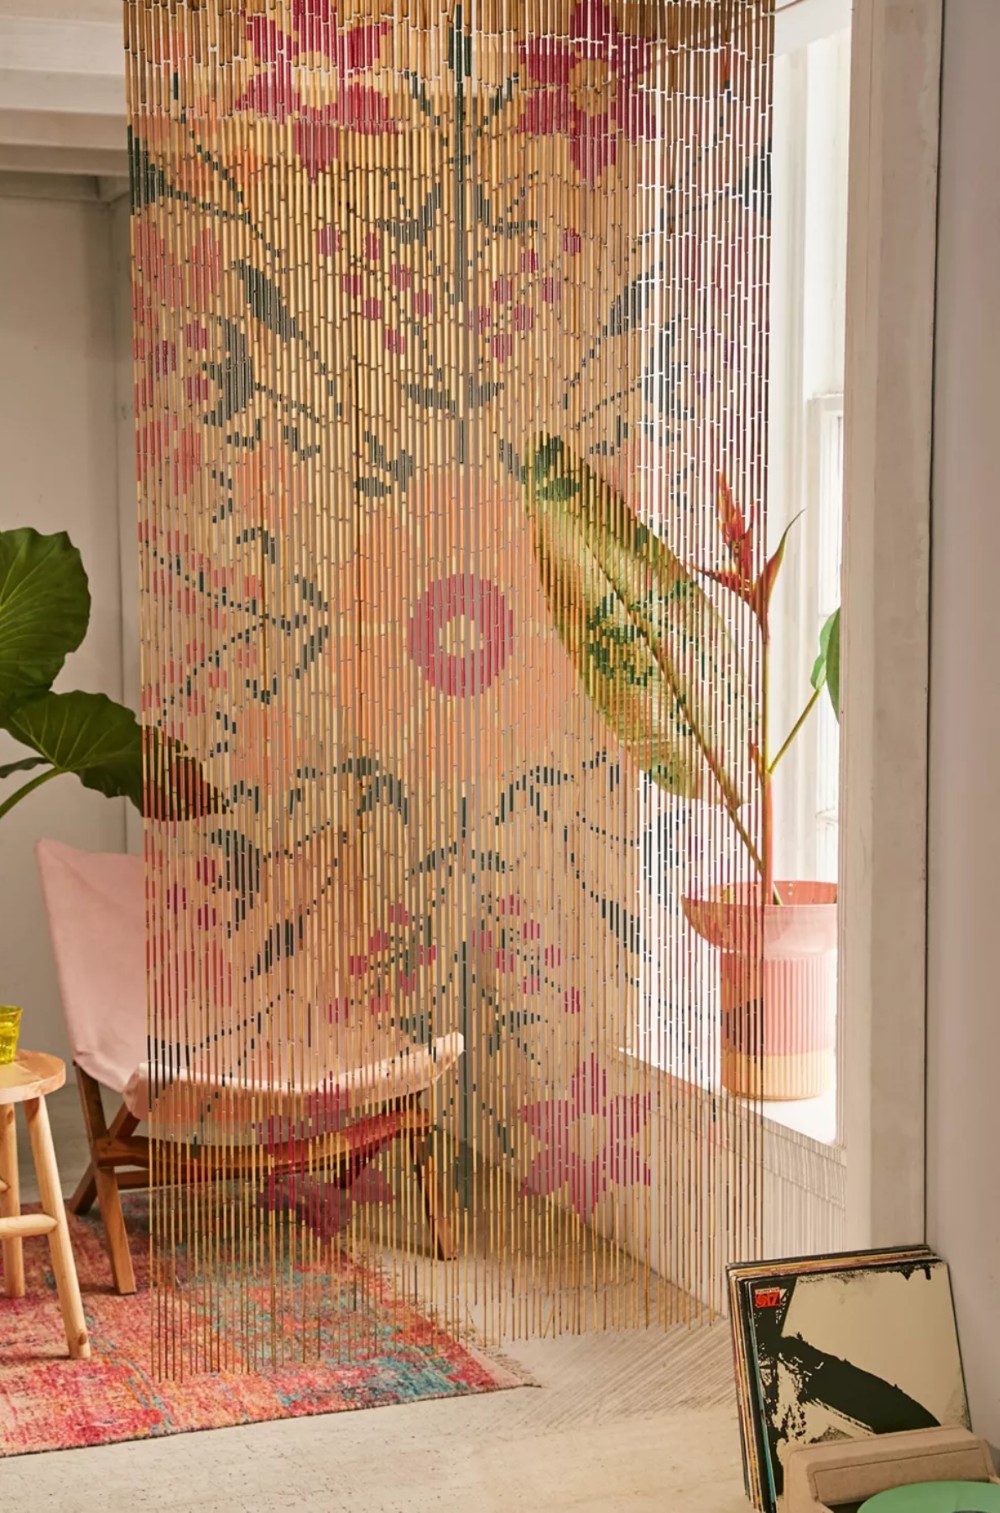 A beaded curtain with floral design